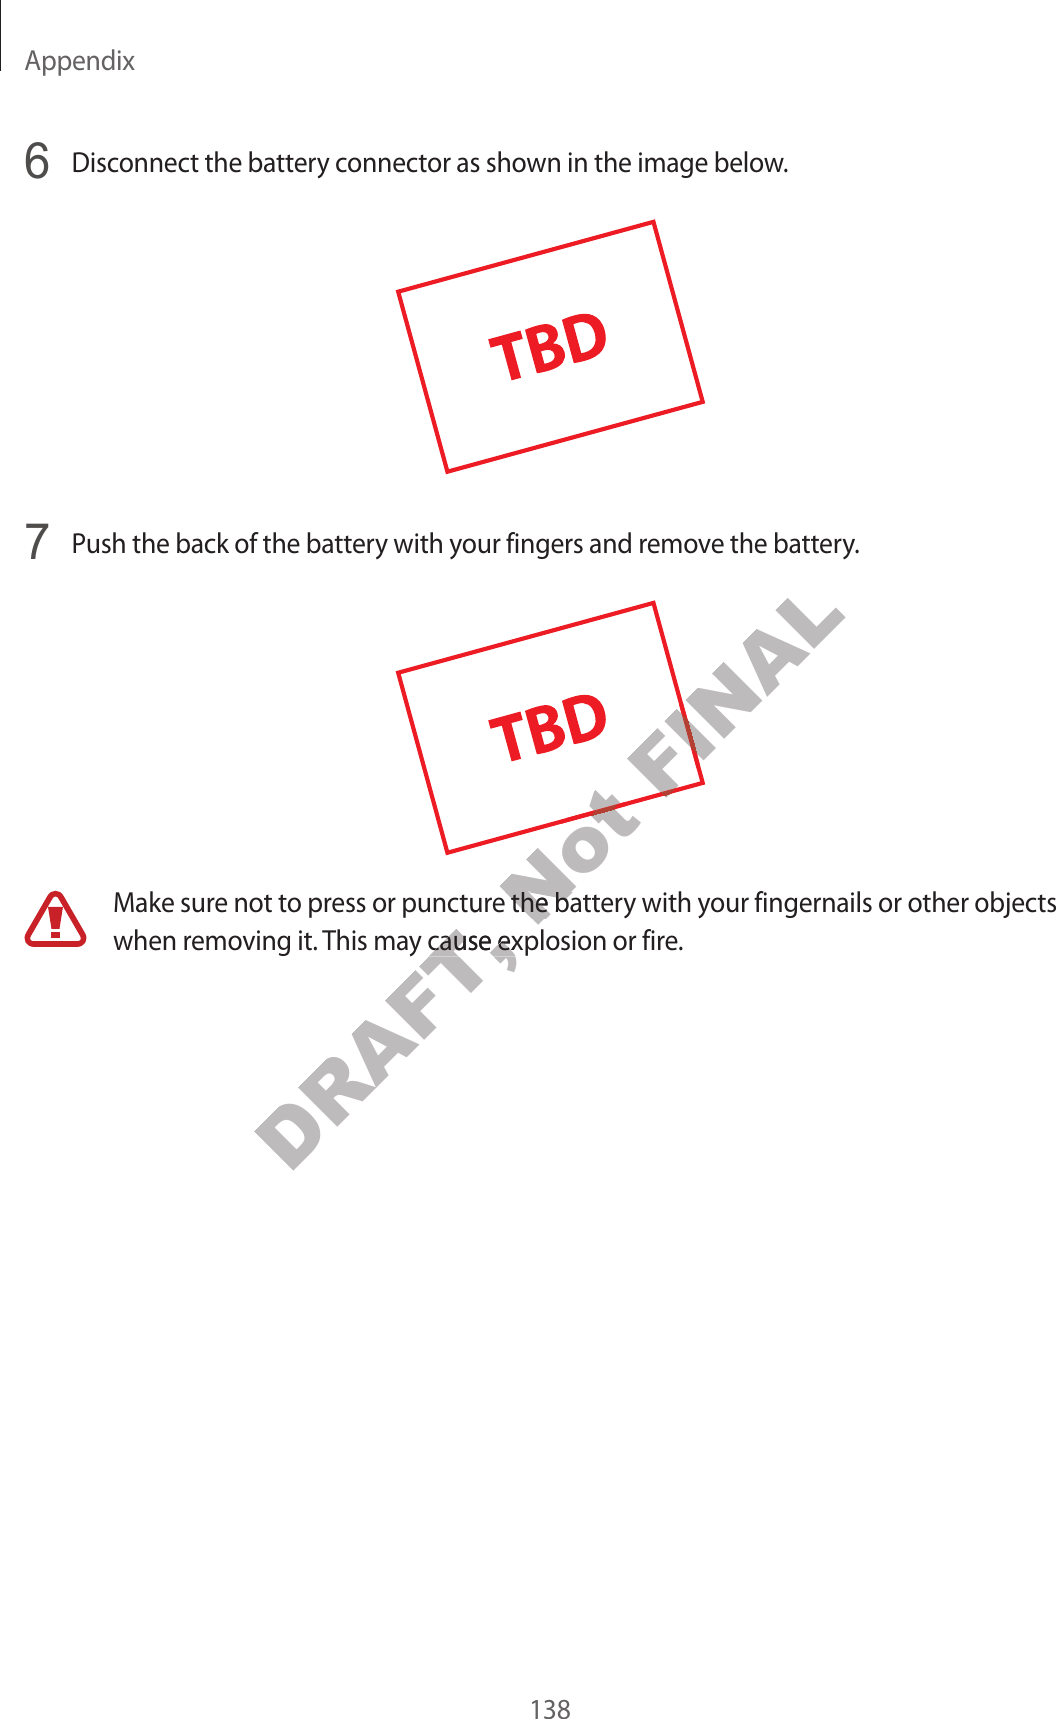 Appendix1386  Disconnect the battery connector as shown in the image below.7  Push the back of the ba ttery with your fingers and remov e the ba ttery.Make sure not to pr ess or puncture the battery with your fingernails or other objects when removing it . This ma y cause explosion or fir e .DRAFT, Make sure not to pr ess or puncture the battery with your fingernails or other objects DRAFT, Make sure not to pr ess or puncture the battery with your fingernails or other objects when removing it . This ma y cause explosion or fir e .DRAFT, when removing it . This ma y cause explosion or fir e .Not Not Not Make sure not to pr ess or puncture the battery with your fingernails or other objects Not Make sure not to pr ess or puncture the battery with your fingernails or other objects FINALFINAL